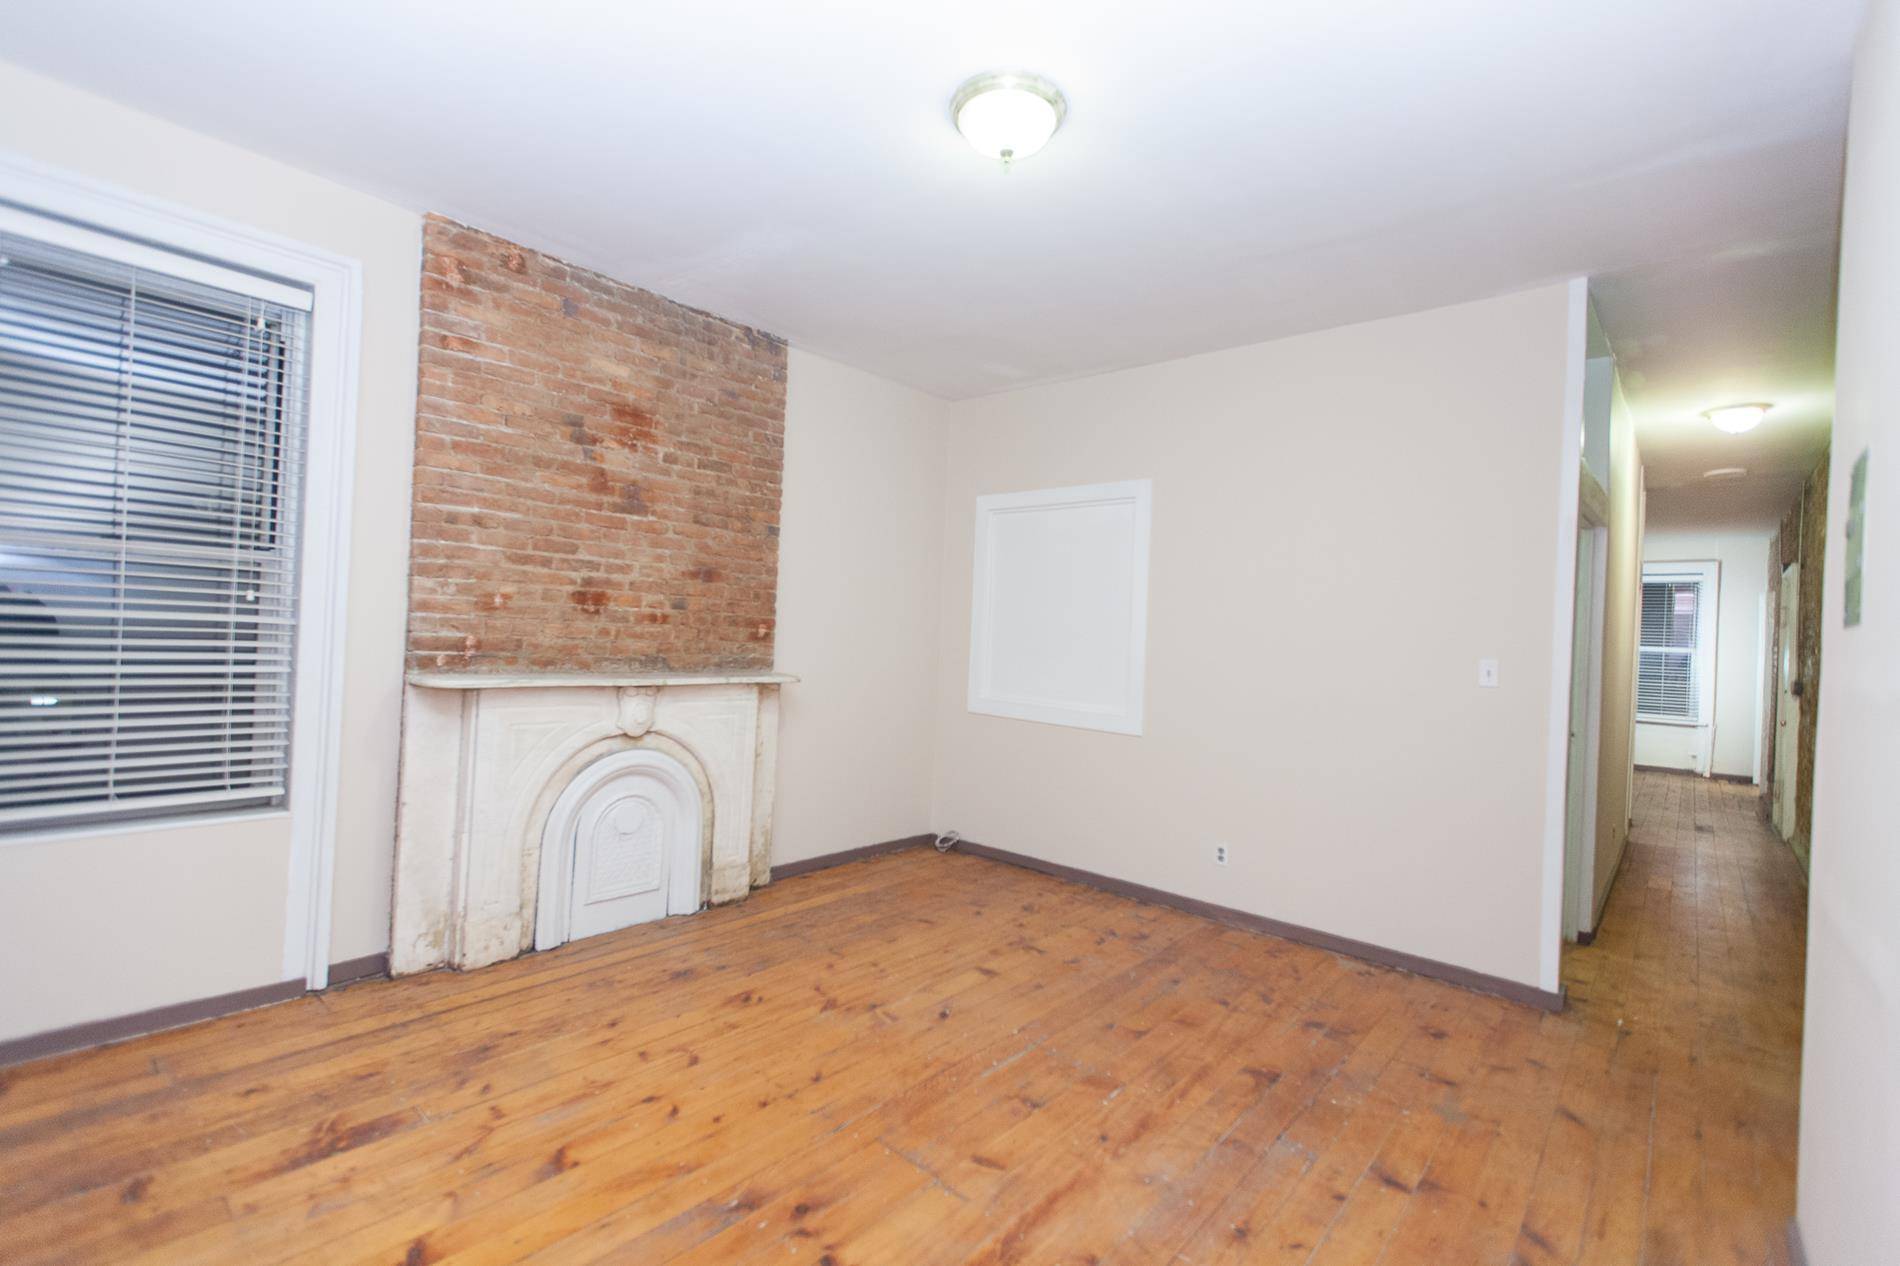 Lovingly restored 1896 1BR floor through tenement in the heart of Williamsburg, only two blocks from the Bedford Avenue subway station.